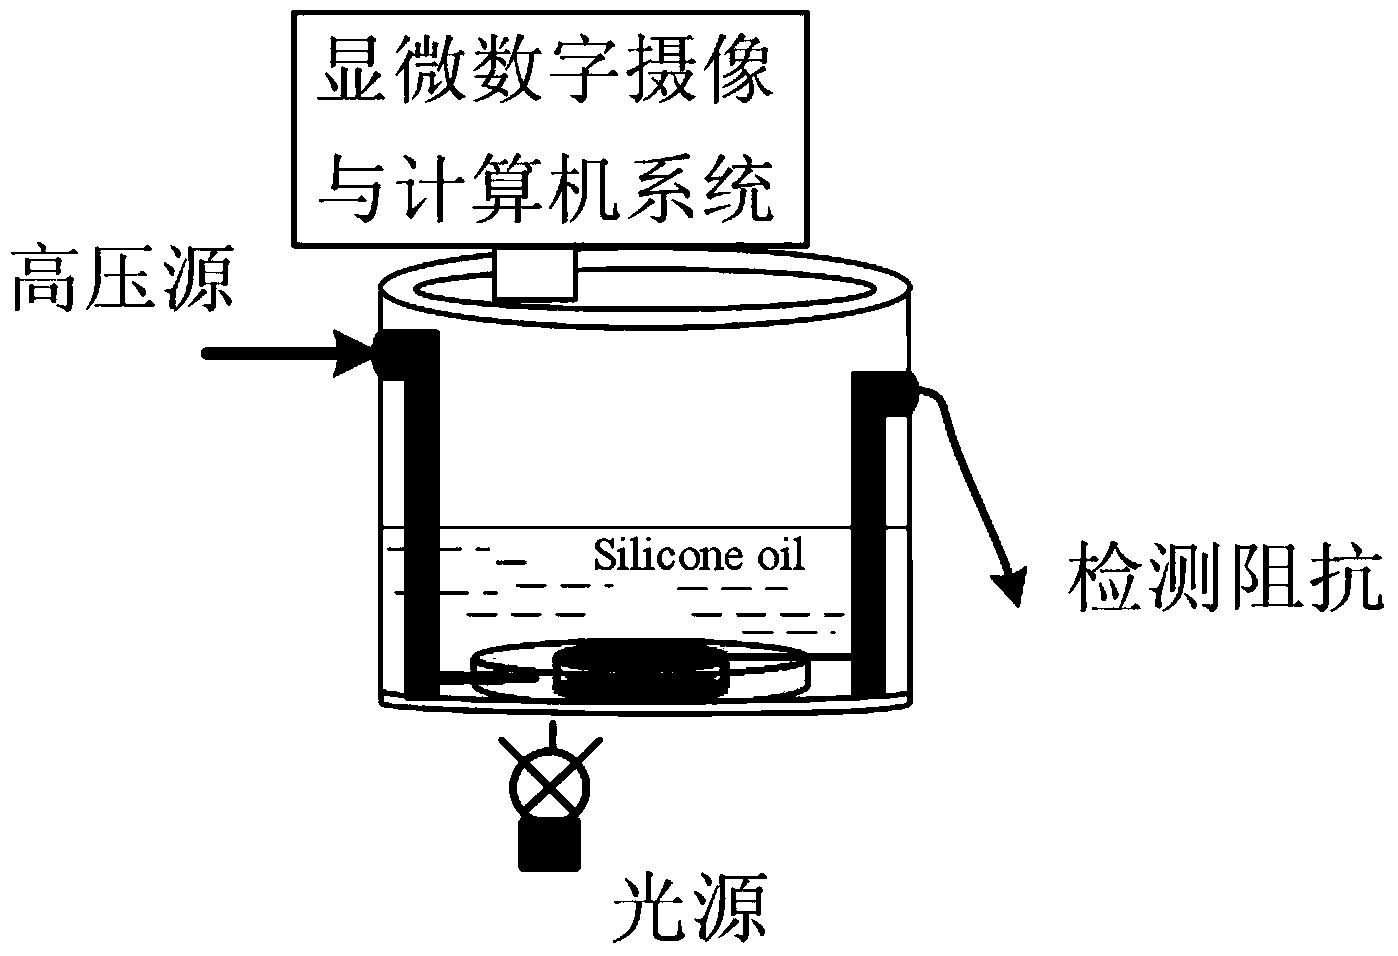 Partial discharge measuring device and method of electrical tree growth process in crosslinked polyethylene (XLPE) cable insulation